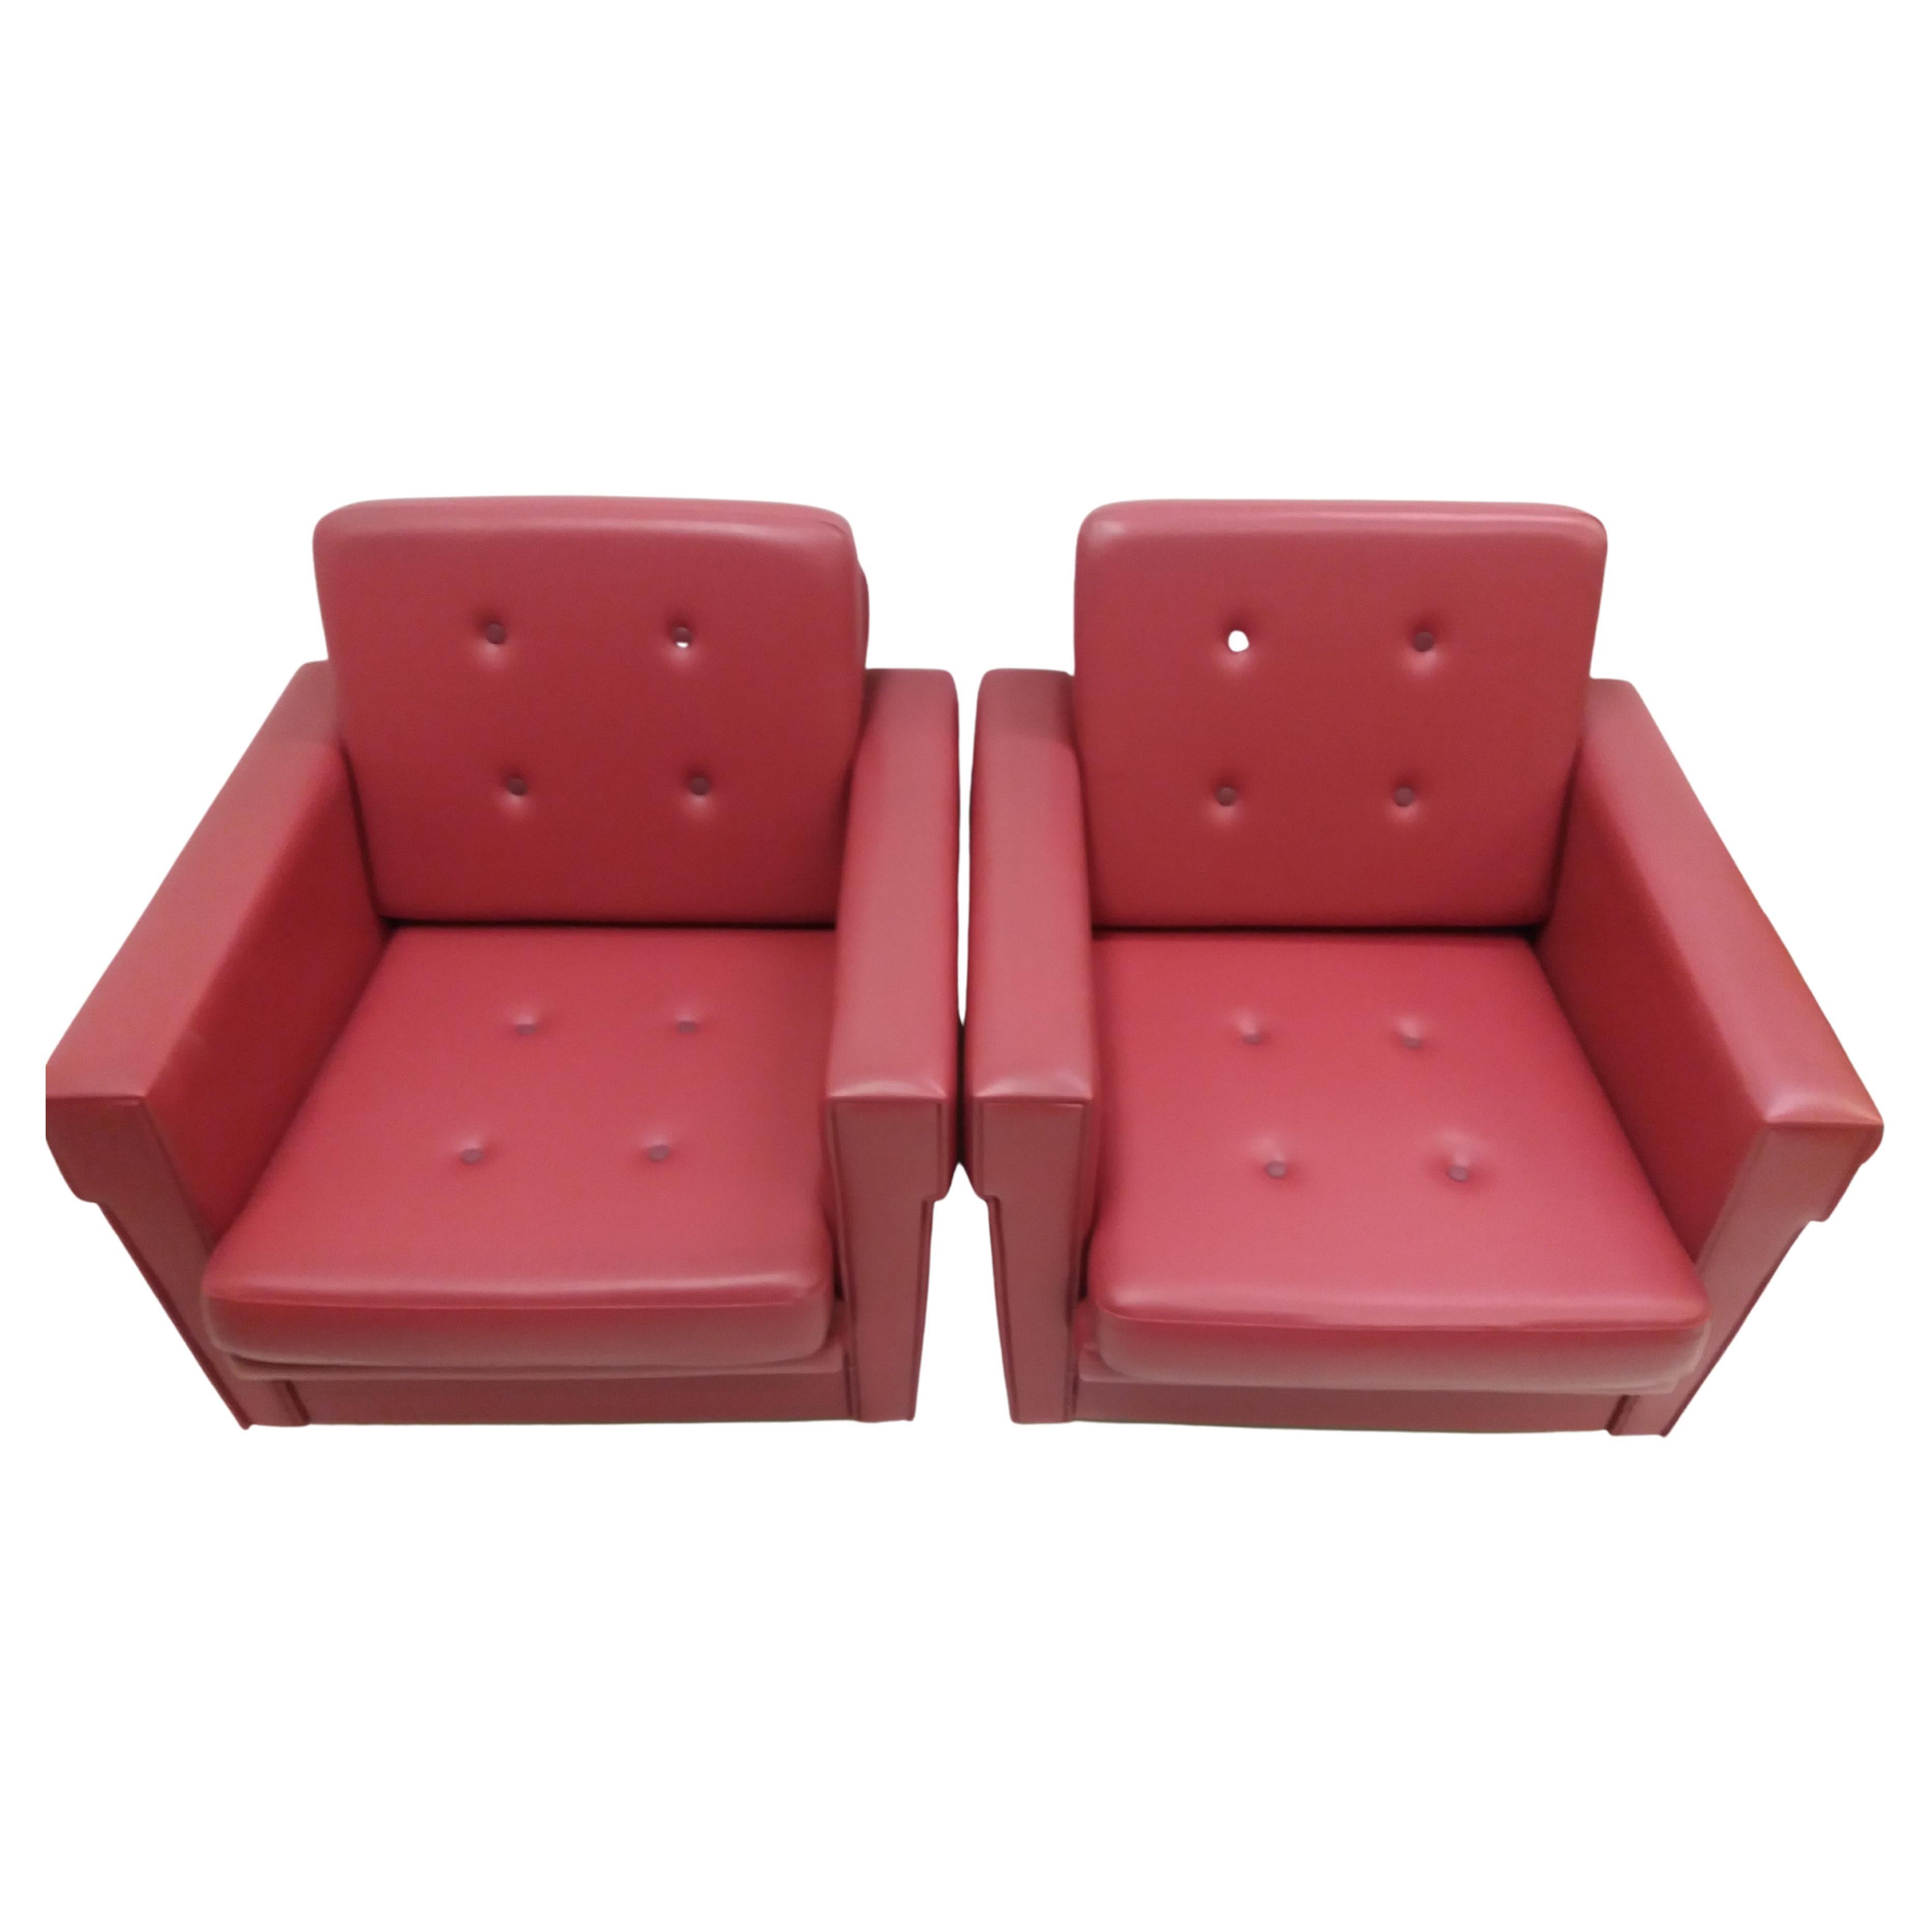 1970 Pair of Brussels Style Armchairs, Czechoslovakia For Sale